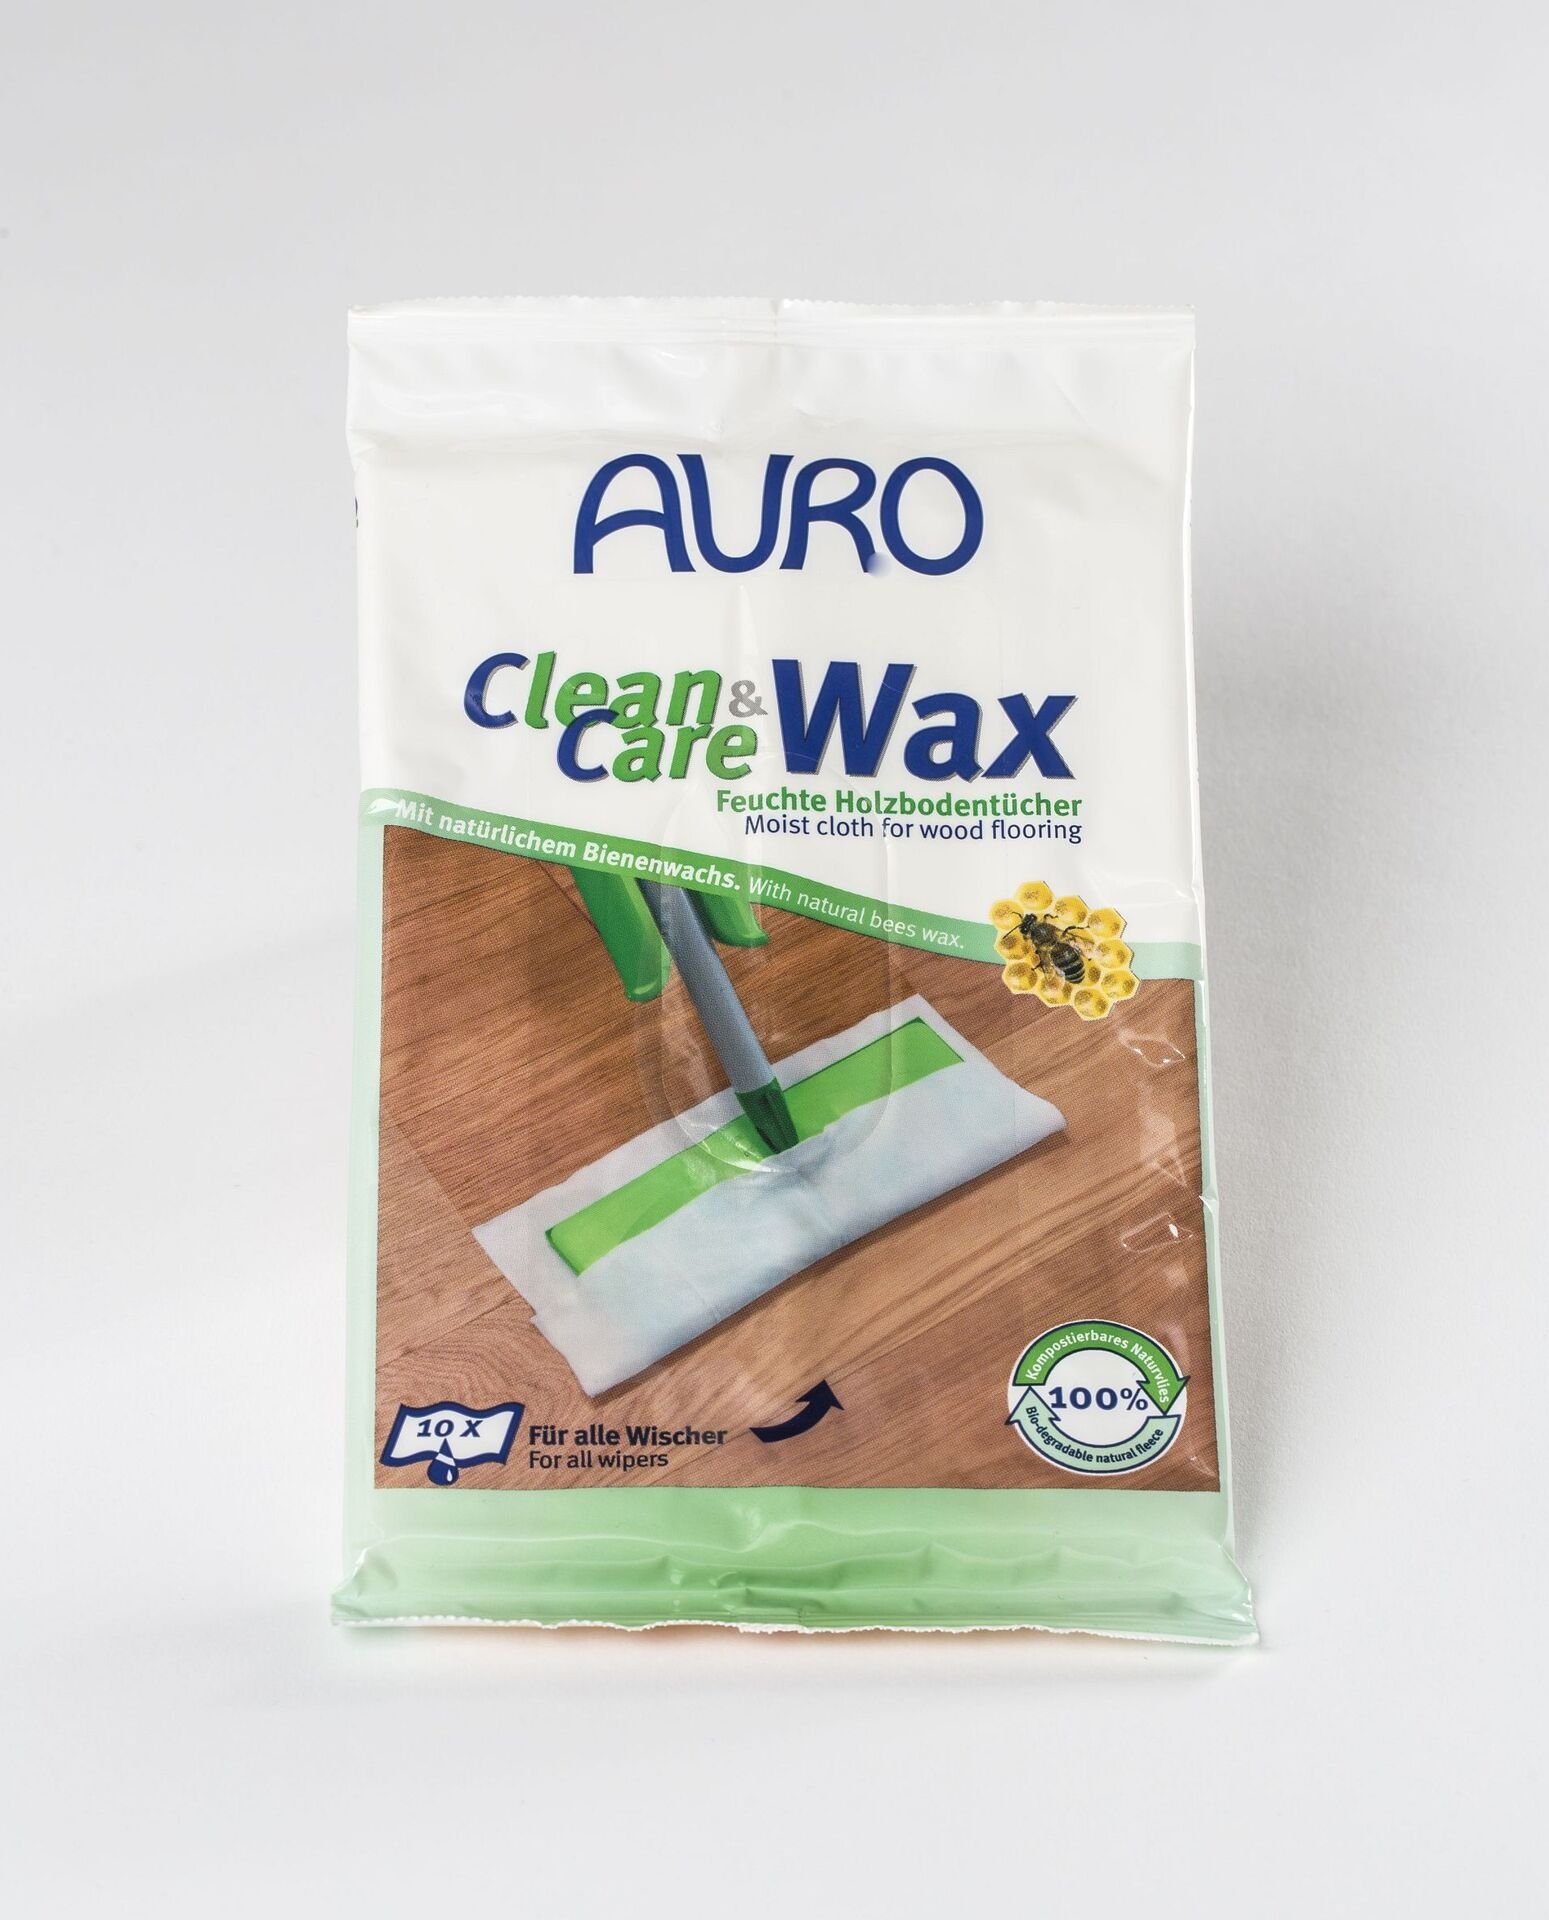 Clean & Care Wax – Feuchte Holzbodentücher